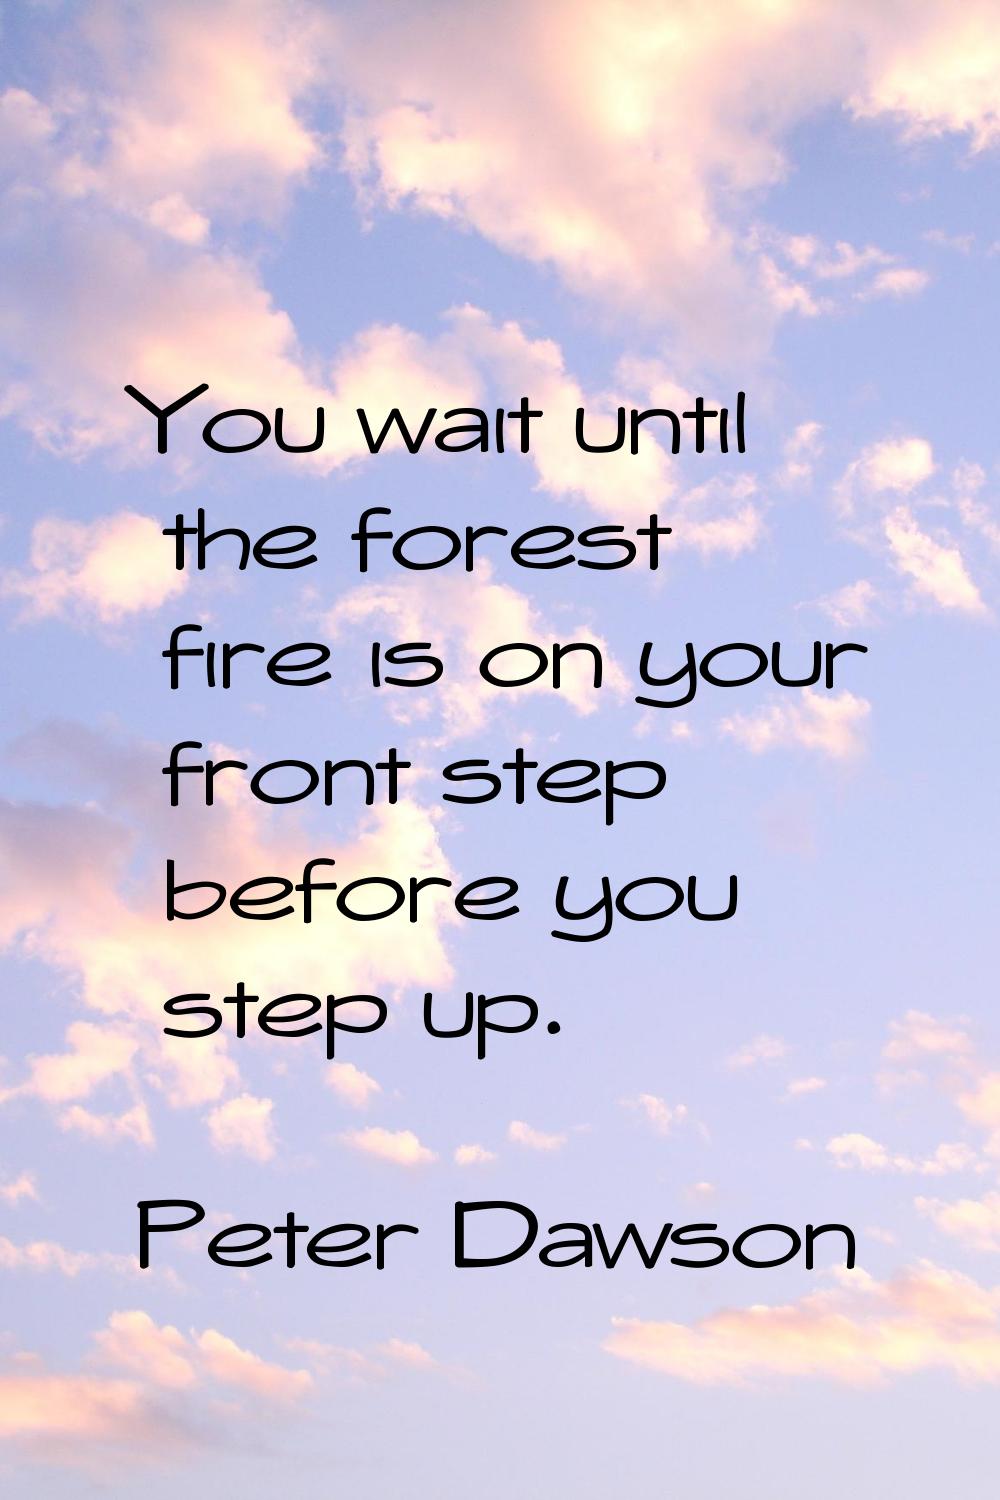 You wait until the forest fire is on your front step before you step up.